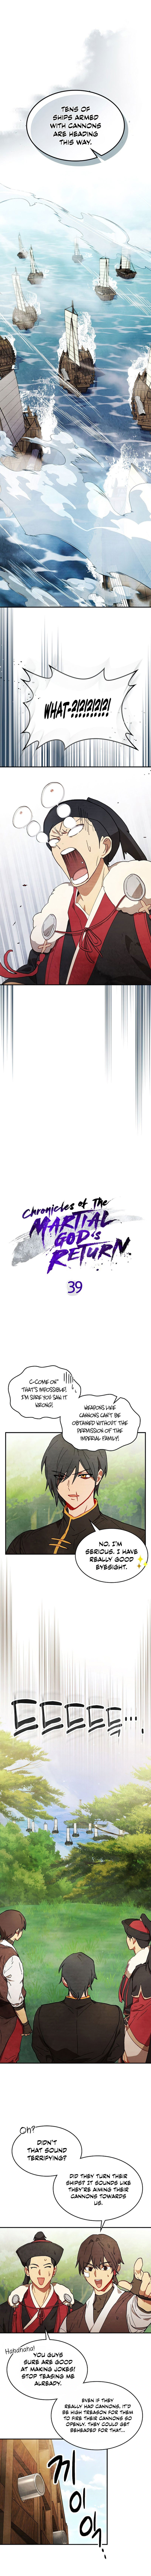 chronicles-of-the-martial-gods-return-chap-39-1